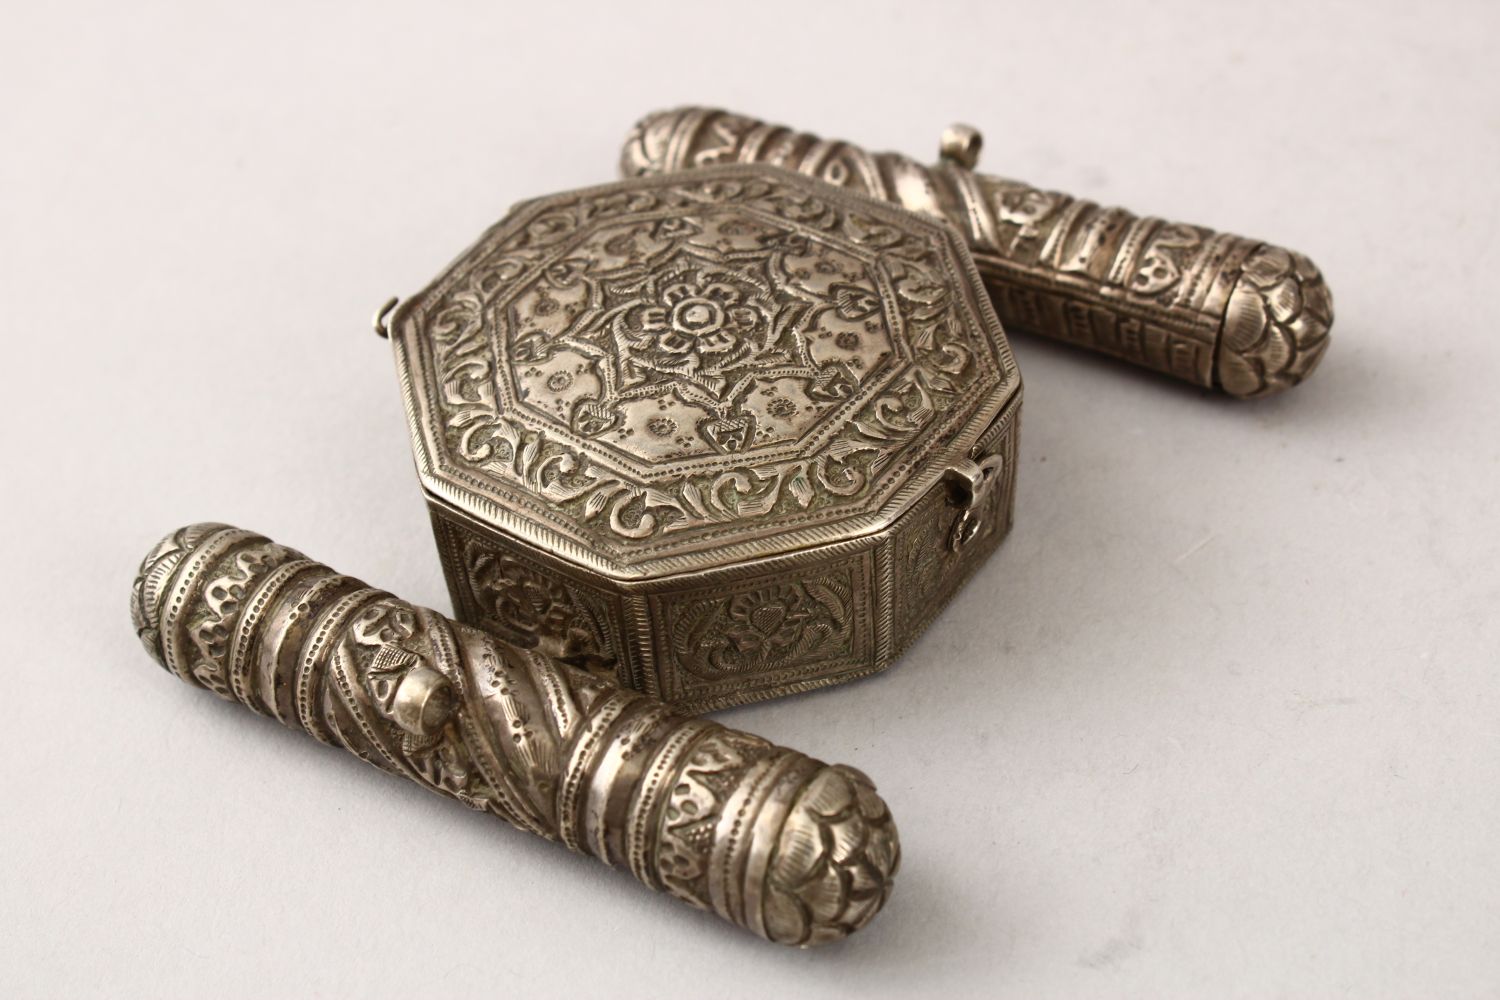 A GOOD CAUCASIAN SILVER BAZBAND AMULET CASE, with embossed decoration, 10cm x 8cm - Image 5 of 8